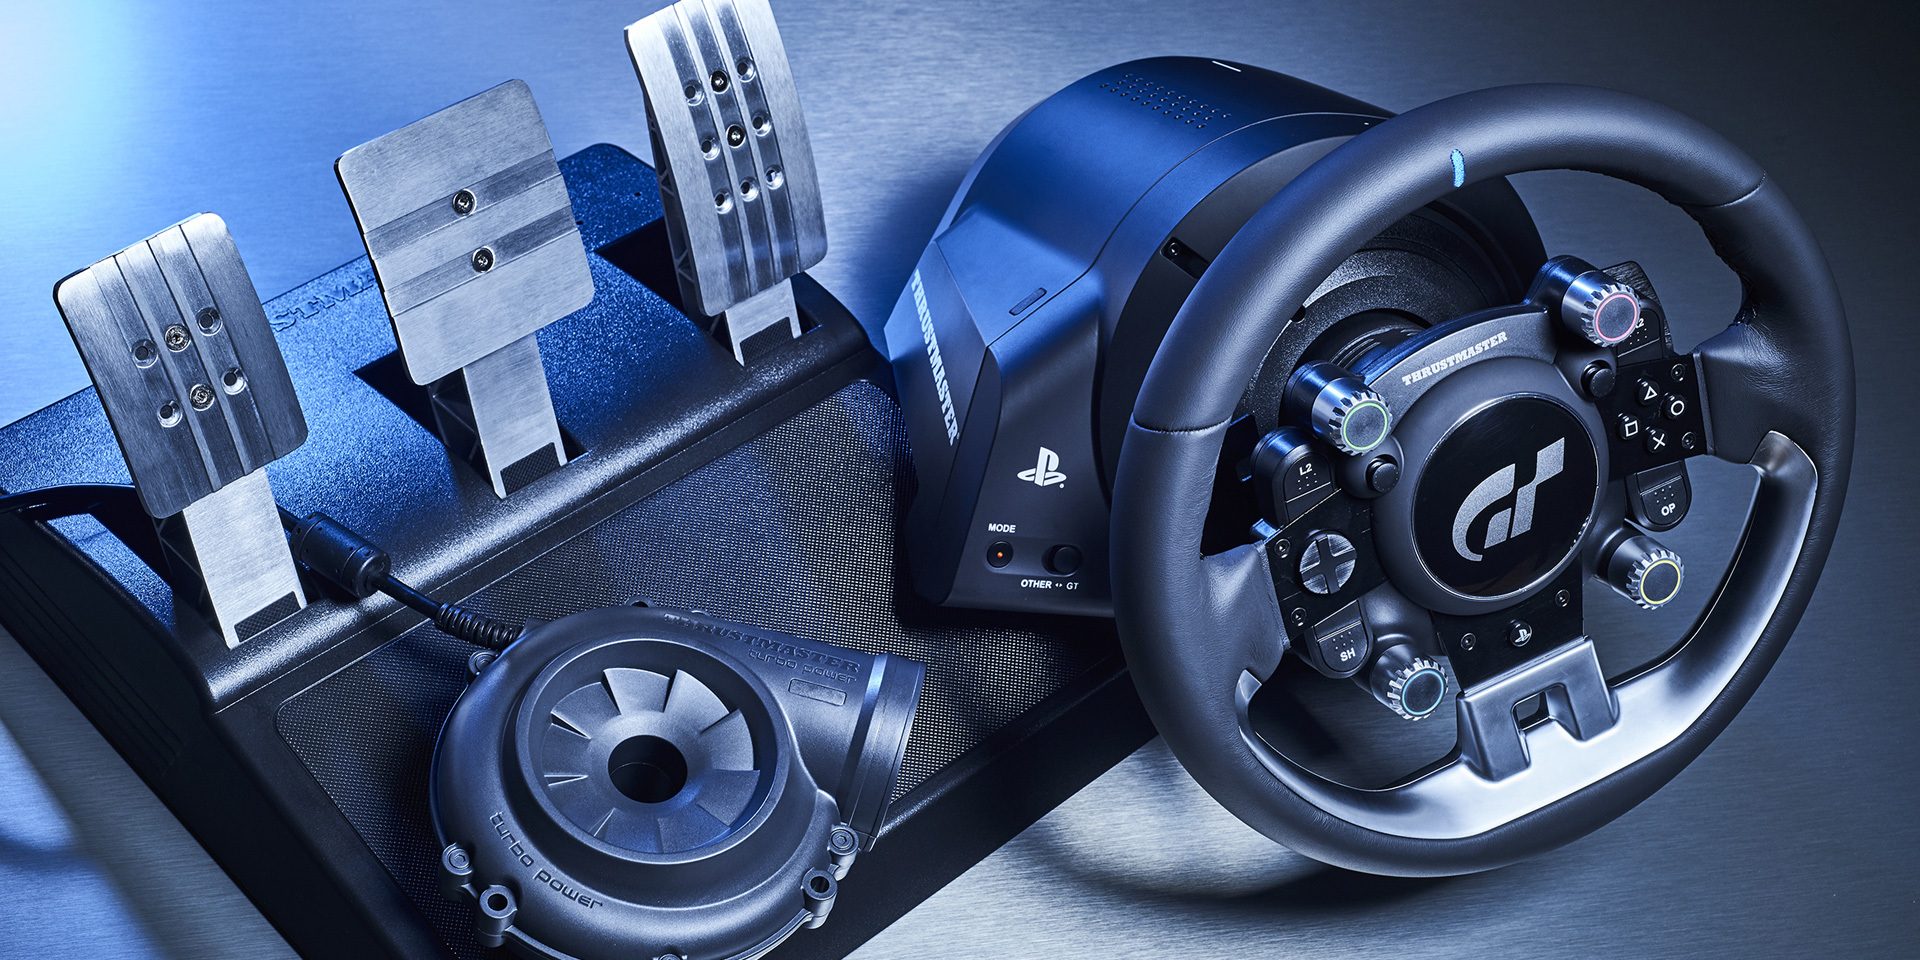 Thrustmaster Reveals $650 T818 Direct Drive Wheel Base – GTPlanet